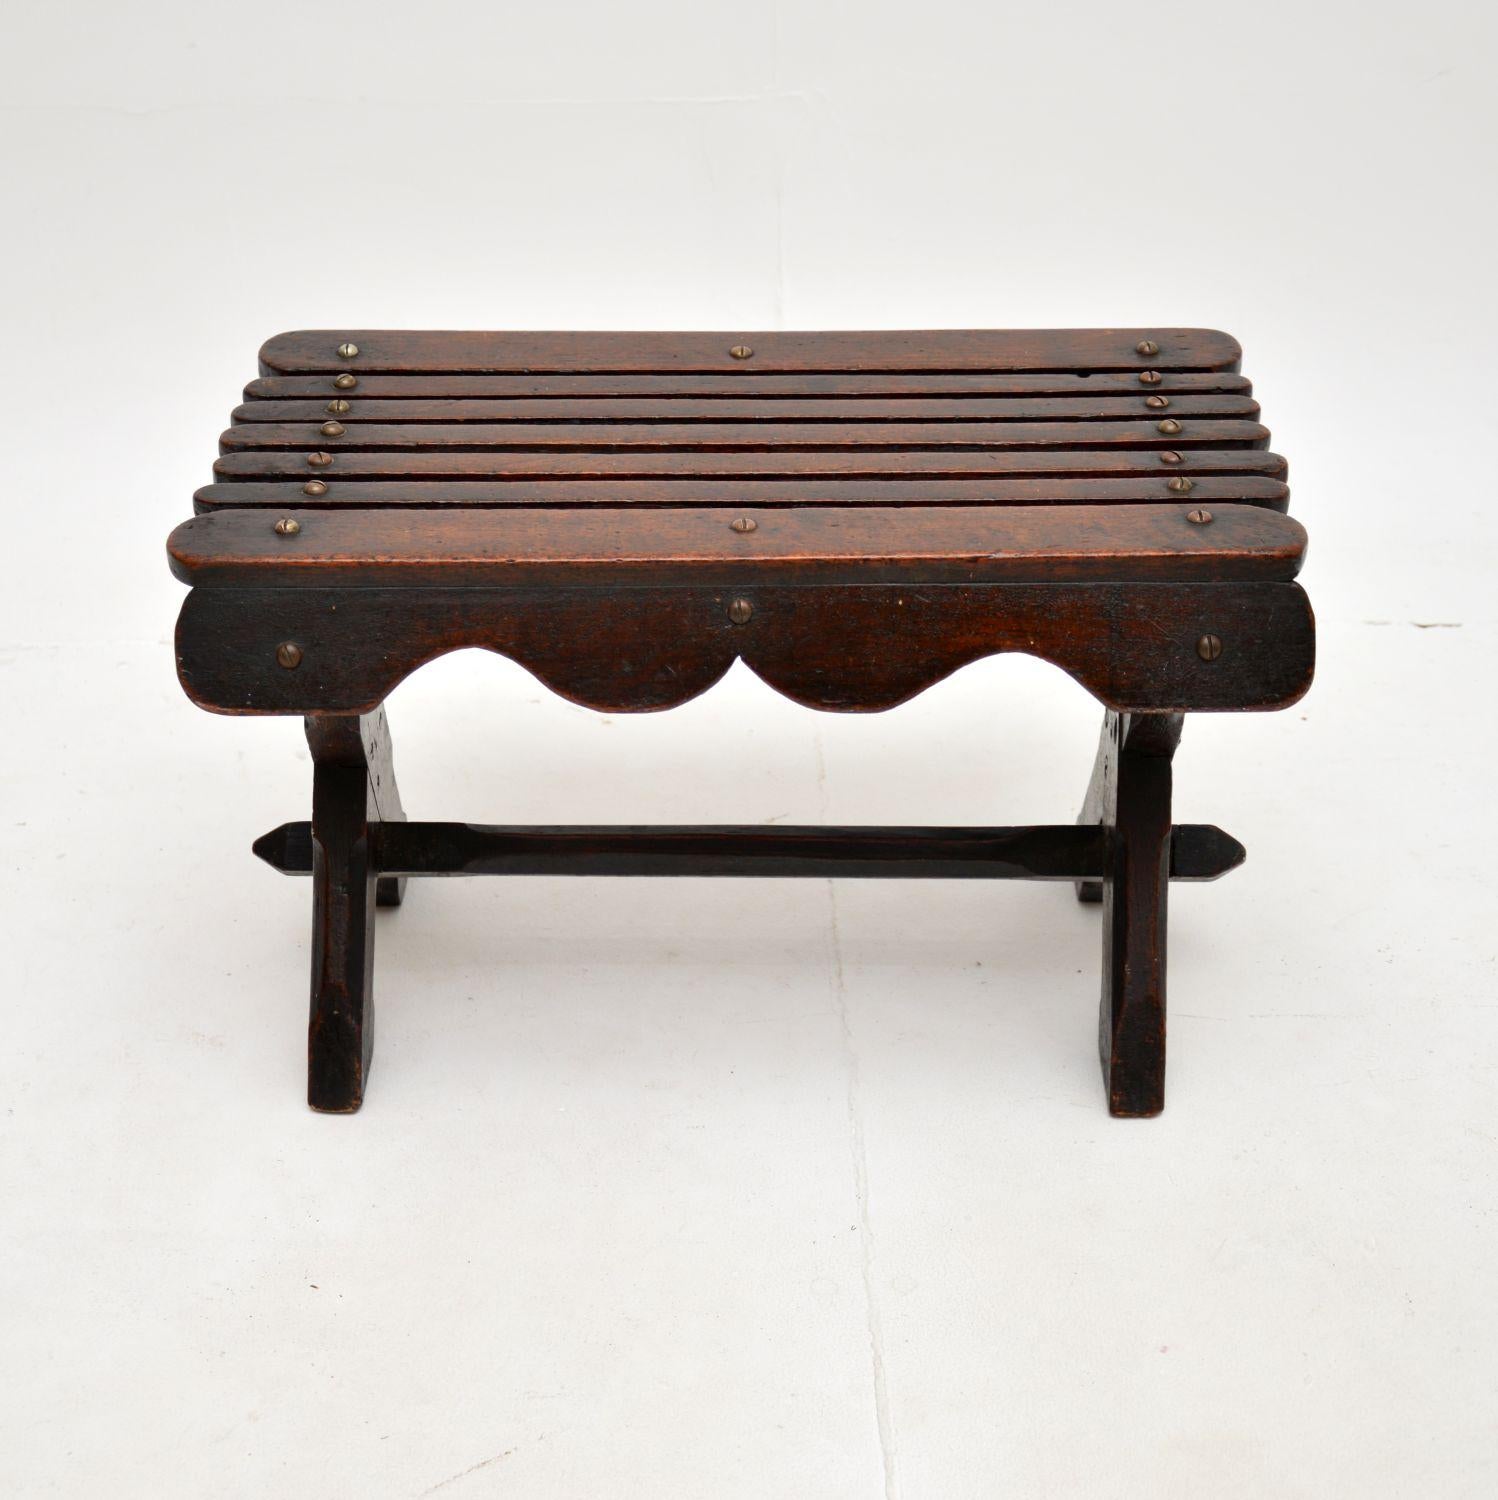 A charming and very unusual Georgian period X frame side table, which could also be used as a stool. This was made in England, we would date it from around the 1860’s period & it’s very much Gothic style.

It is very small and also very well made